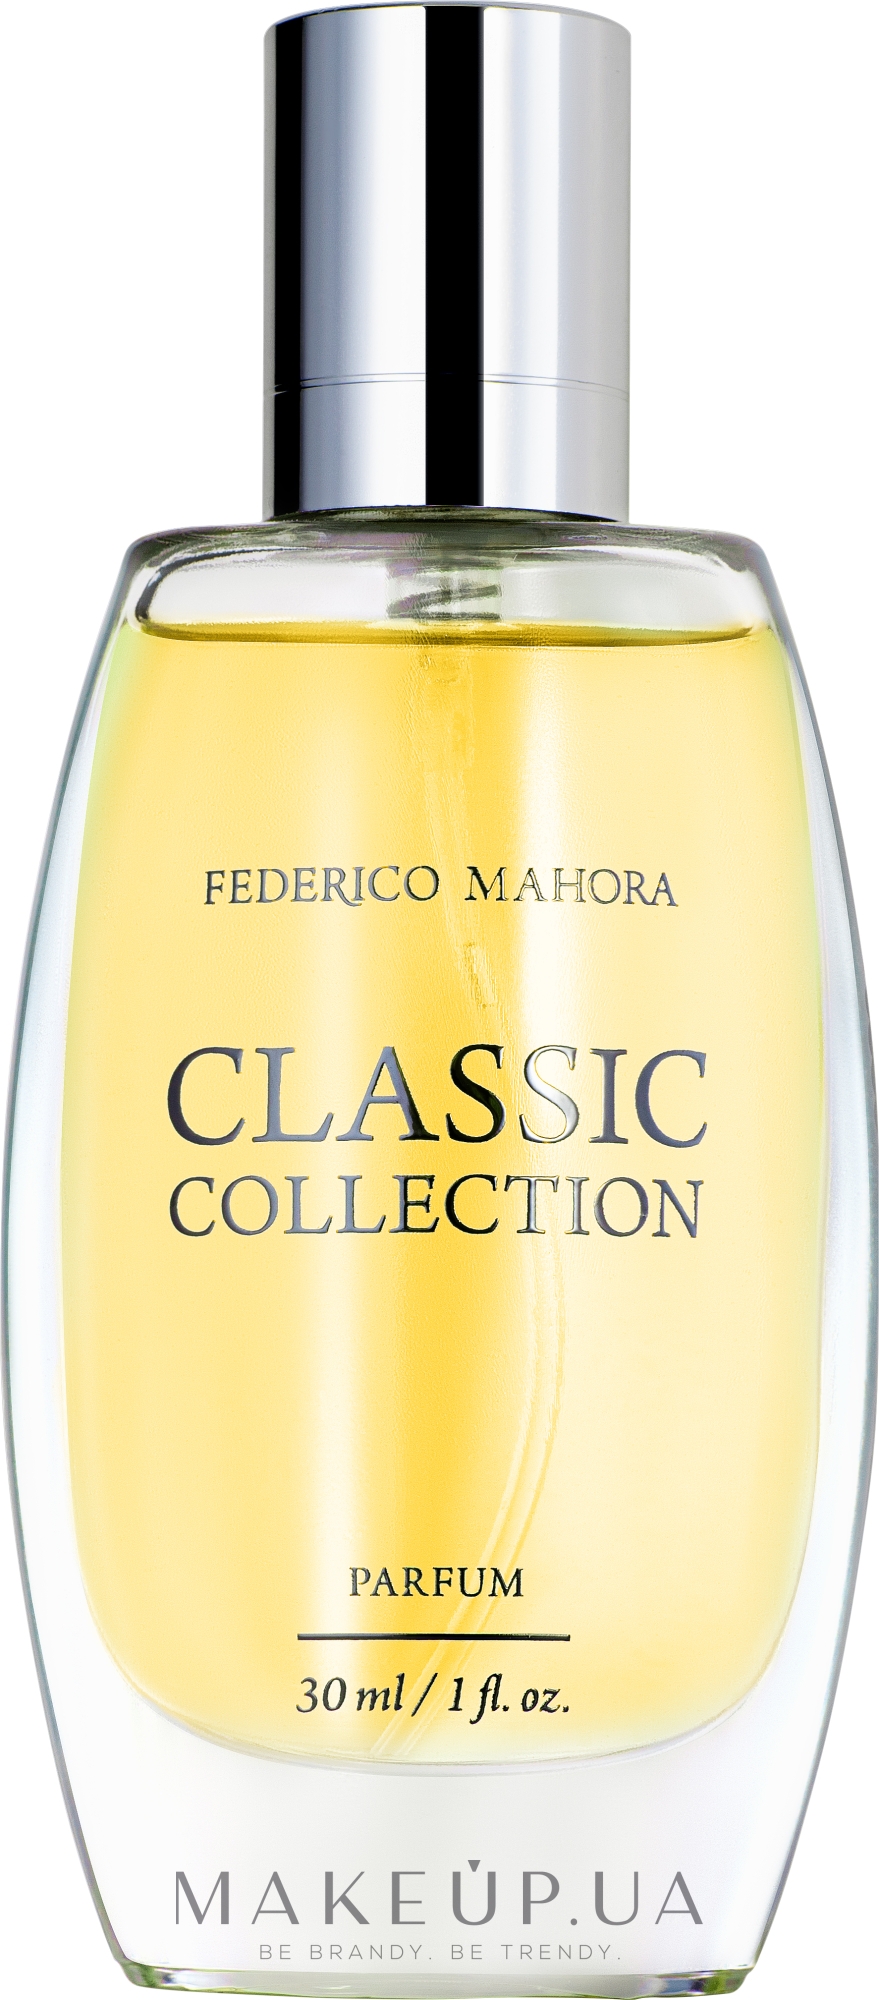 Fm collection. Classic collection духи Federico Mahora. Fm by Federico Mahora Parfum Classic collection fm 24. Federico Mahora Classic collection fm 97. Federico Mahora Classic collection Fragrance 16%.